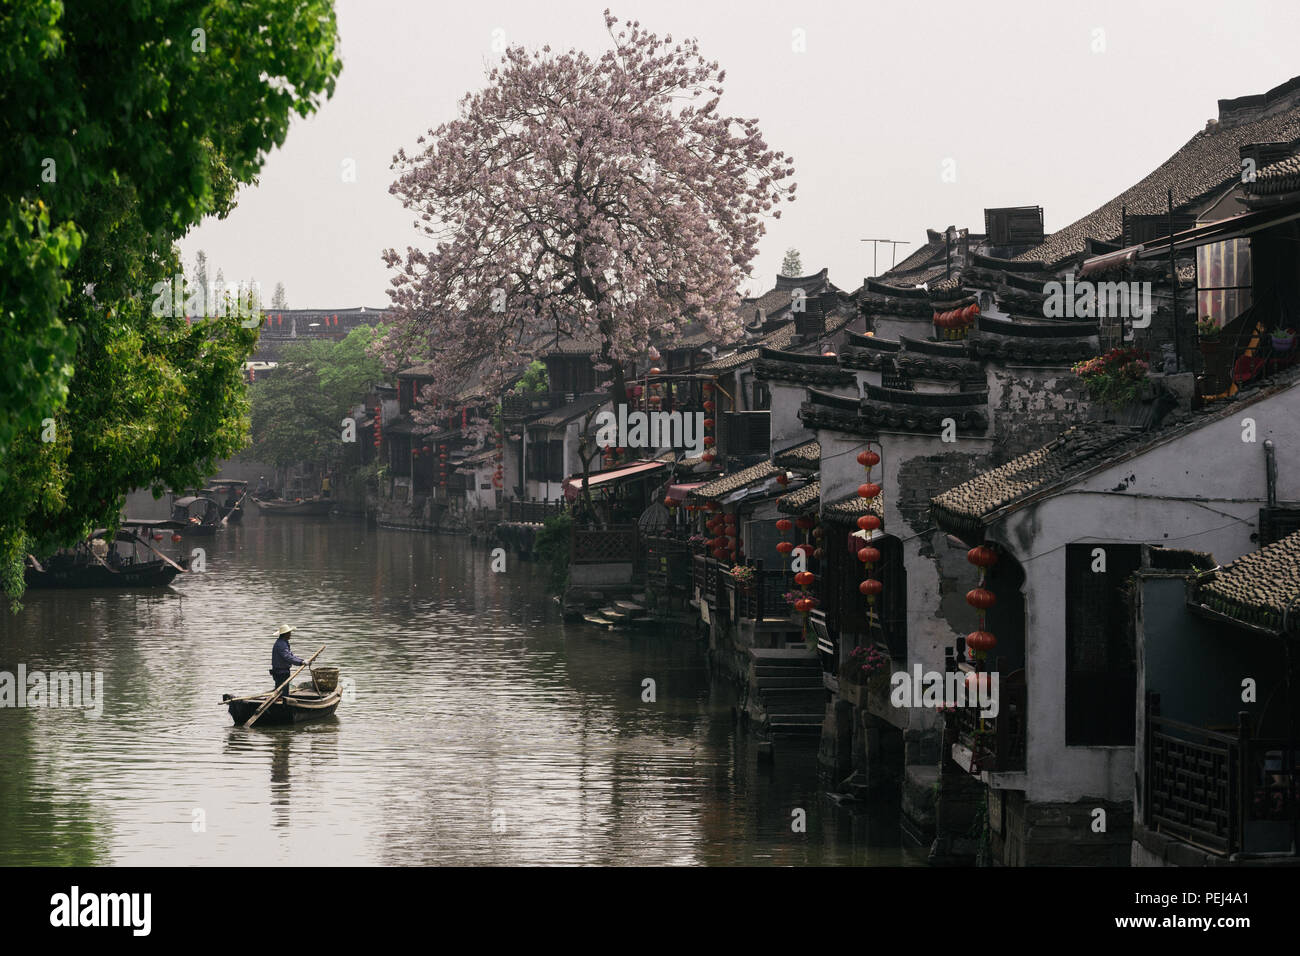 Man standing on a boat in Xitang, China Stock Photo